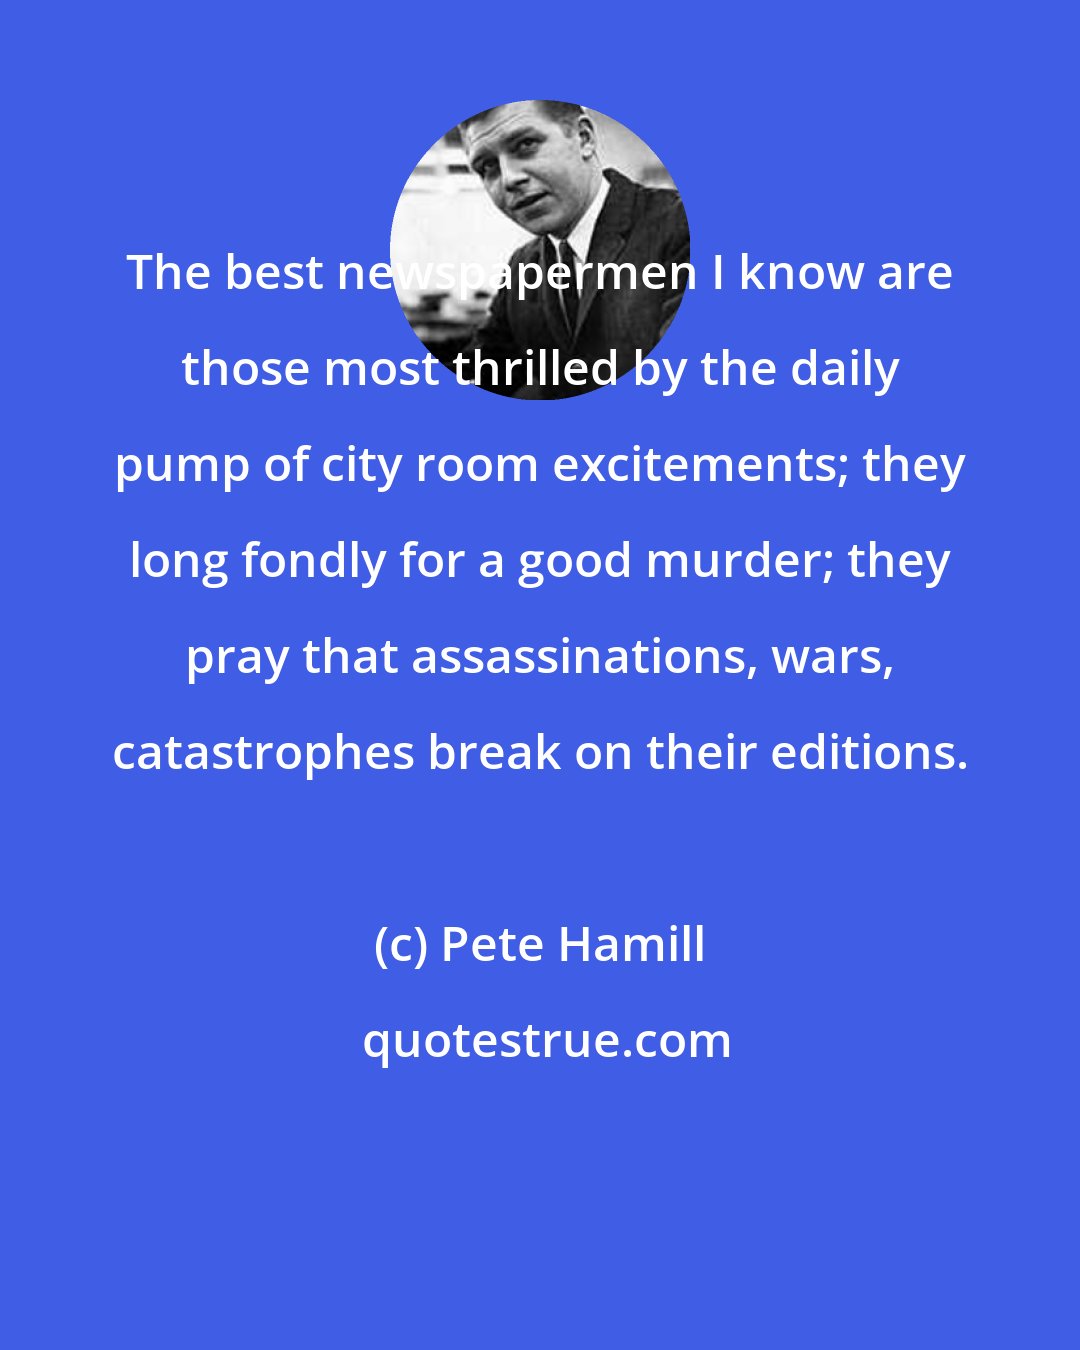 Pete Hamill: The best newspapermen I know are those most thrilled by the daily pump of city room excitements; they long fondly for a good murder; they pray that assassinations, wars, catastrophes break on their editions.